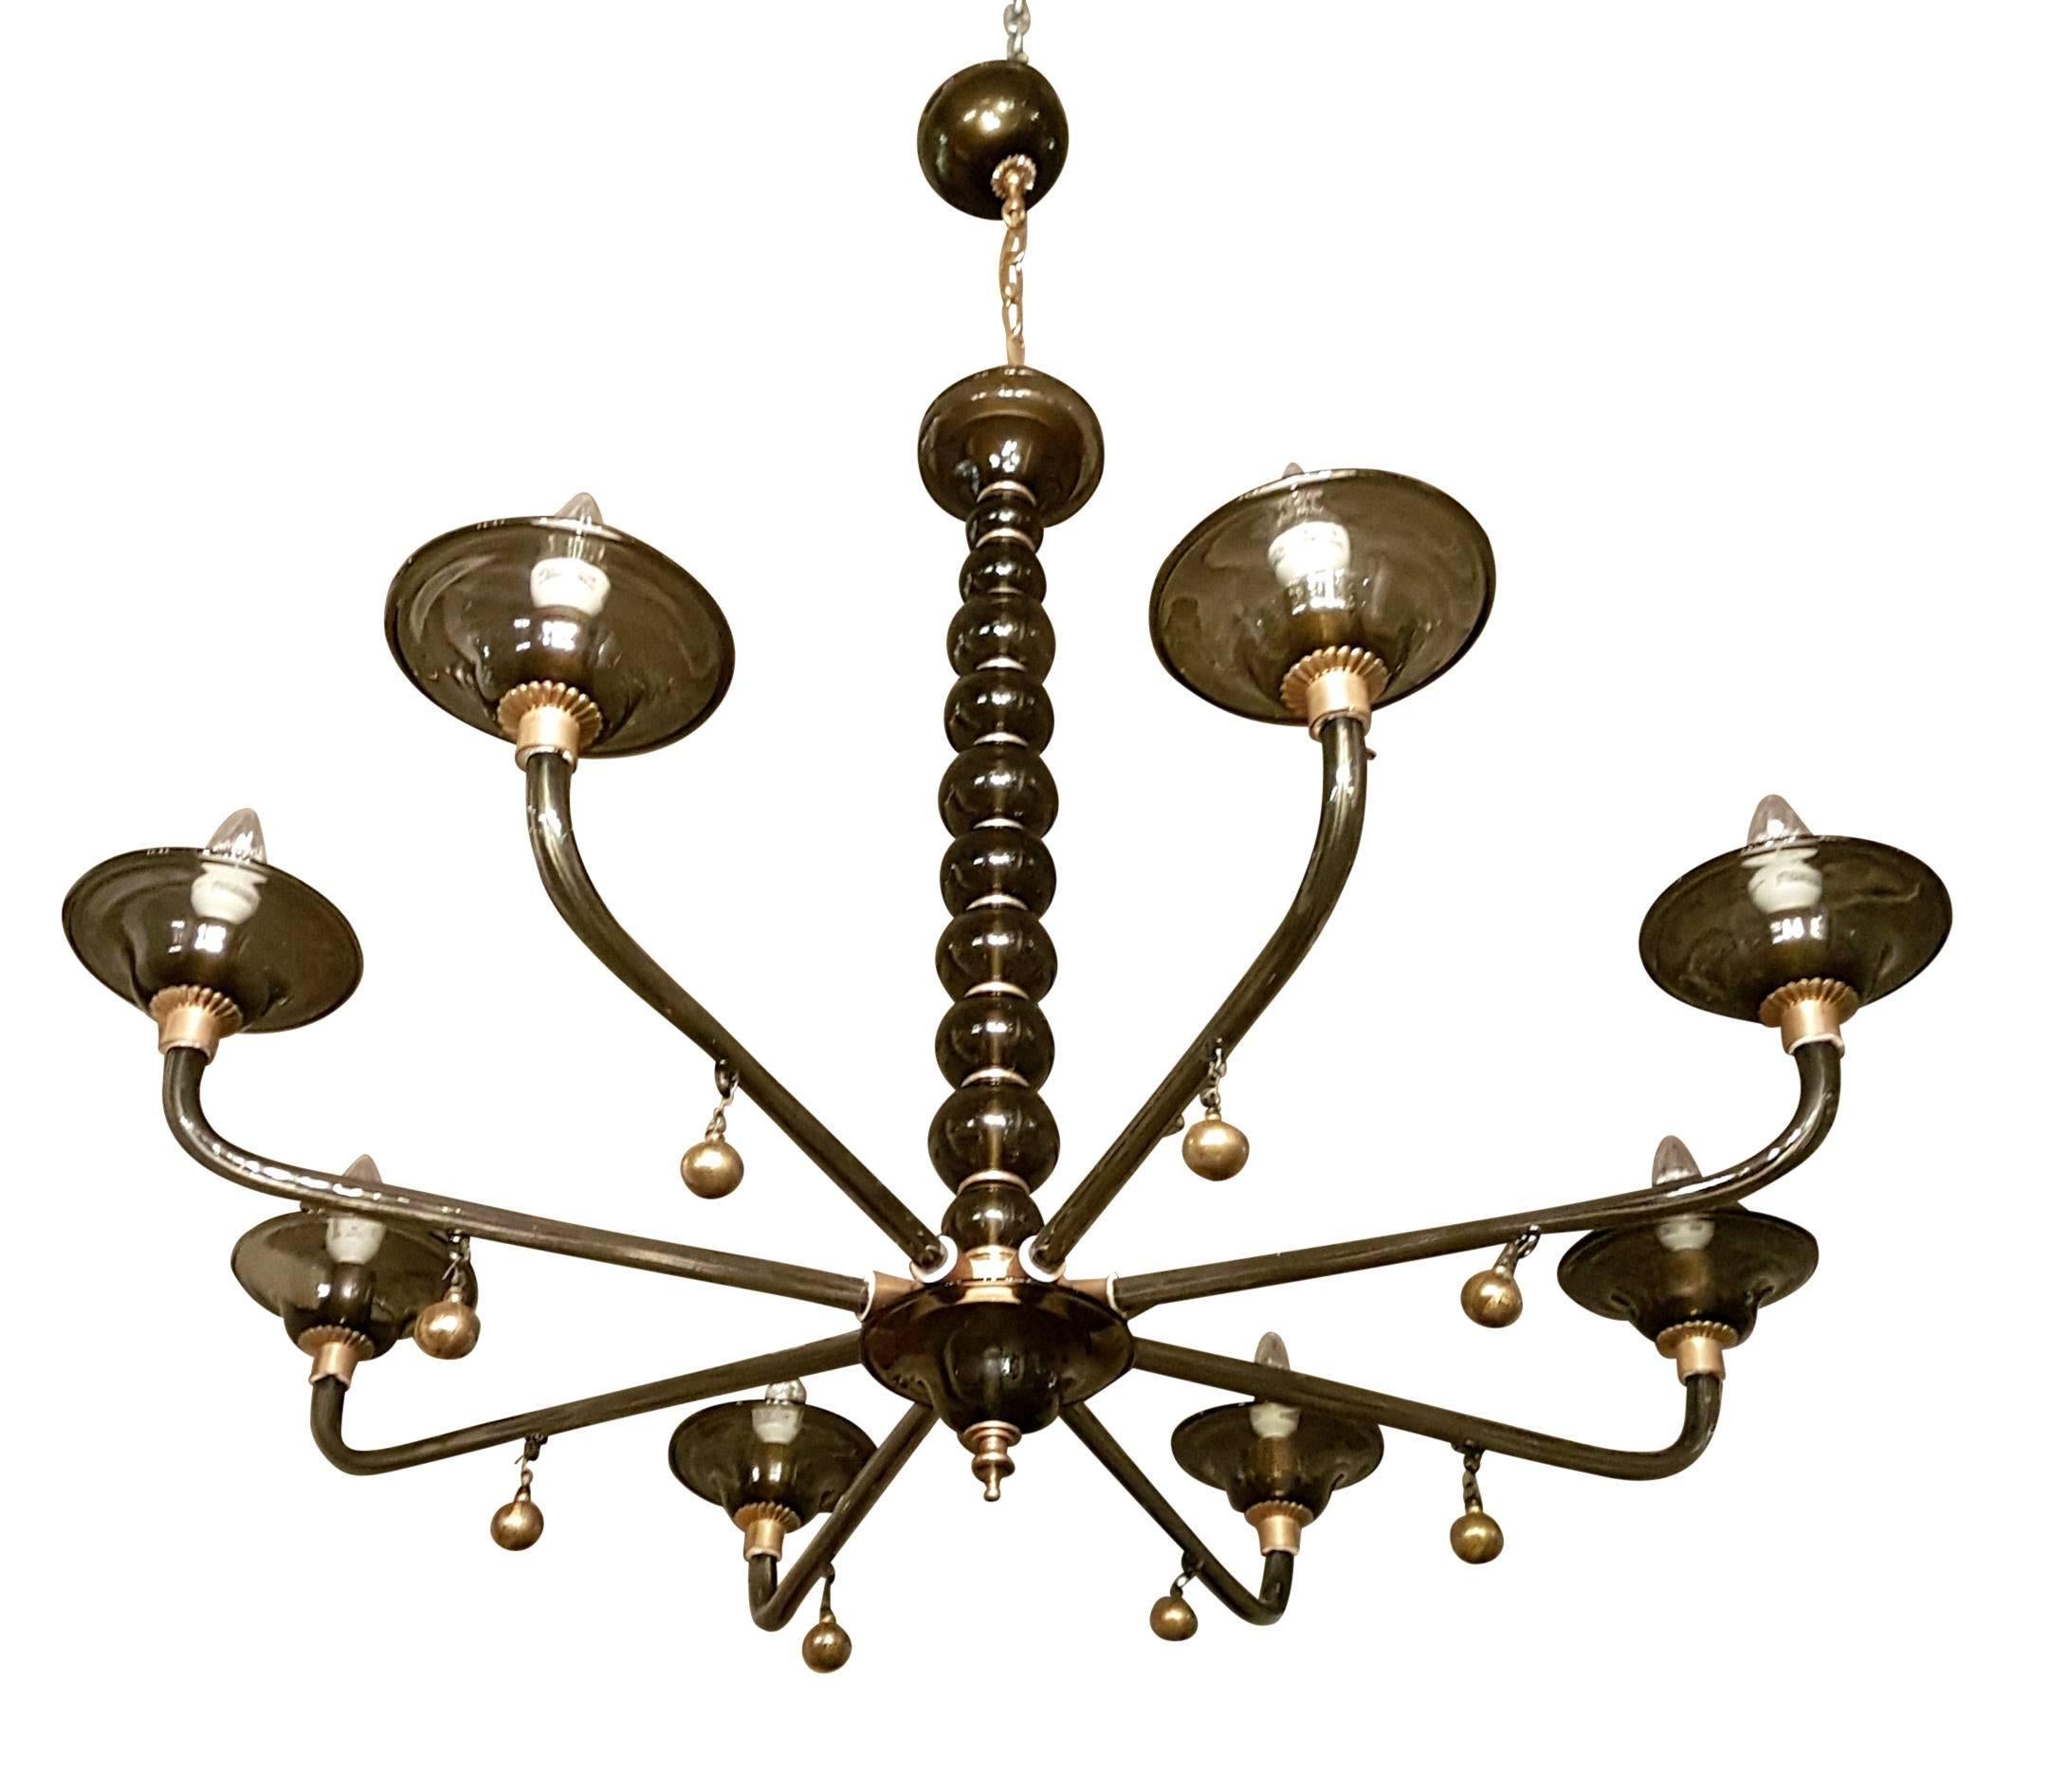 Large handblown Murano dark gray and gold leaf flakes glass, eight lights/arms chandelier.
With brass mounts.
It has a brass chain and second canopy, which gives an adjustable height to this chandelier.
Total height with chain: H 50.5 inches, 31